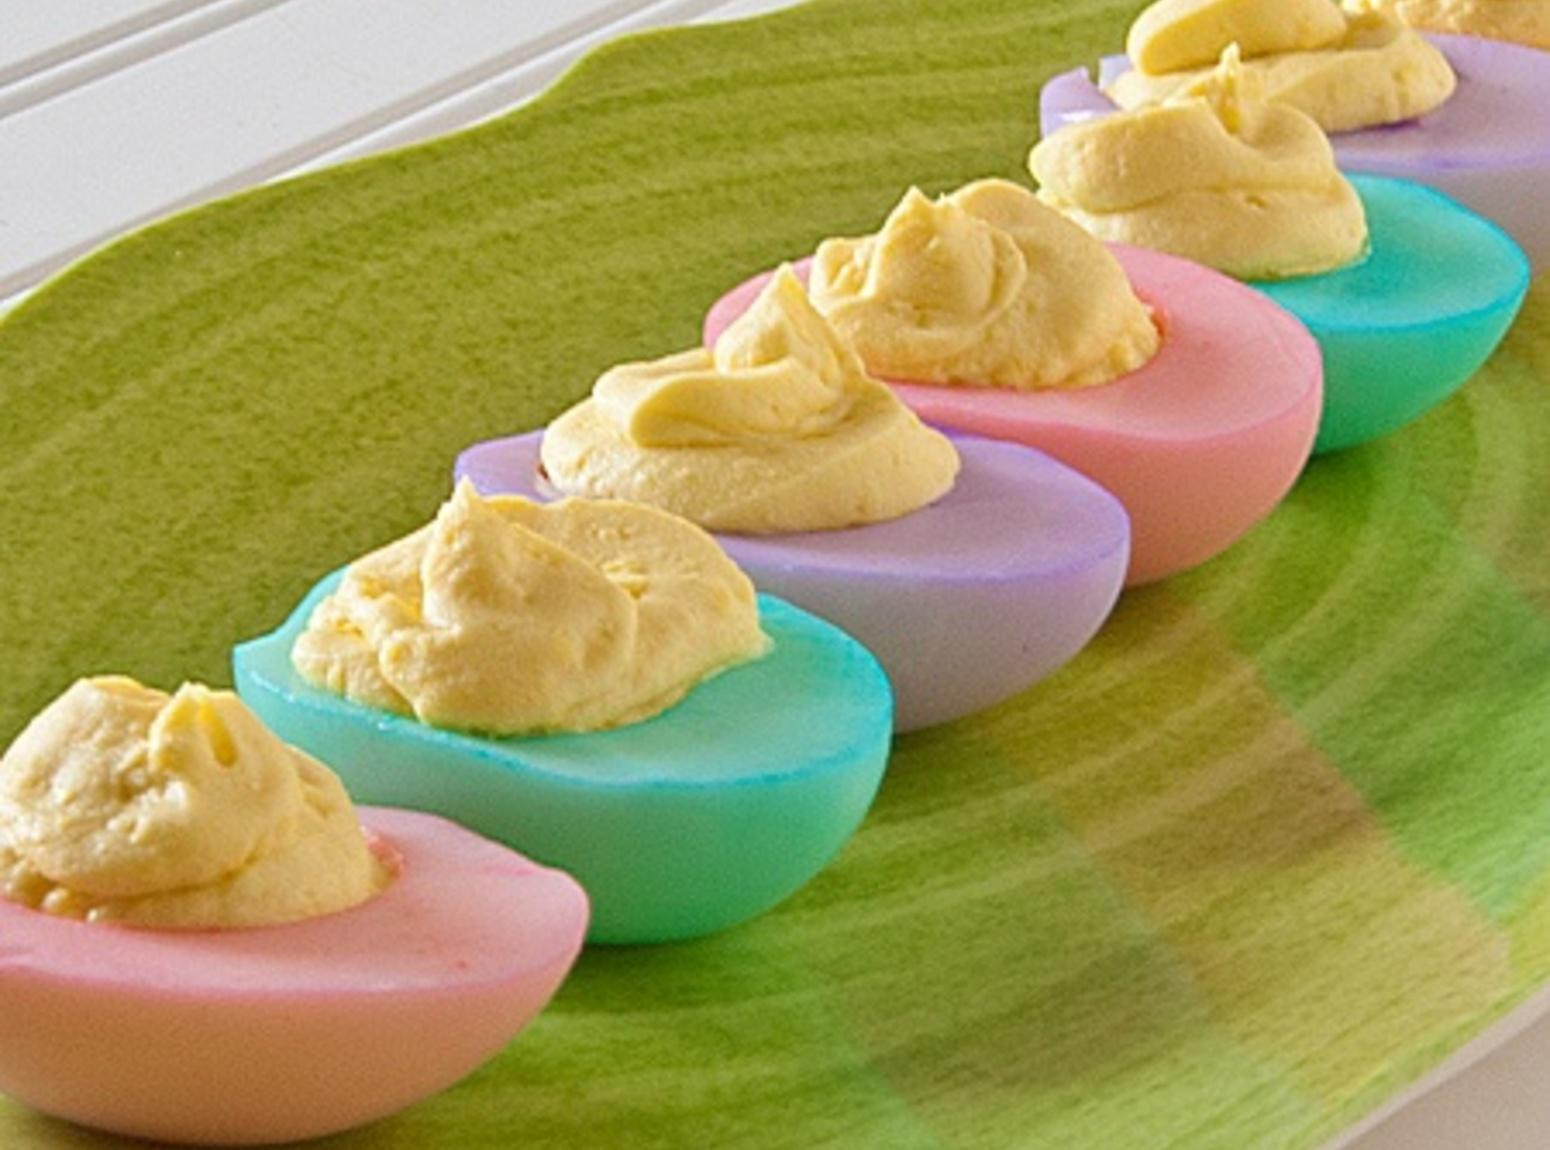 Dyed Deviled Eggs Awesome Colored Deviled Eggs Recipe